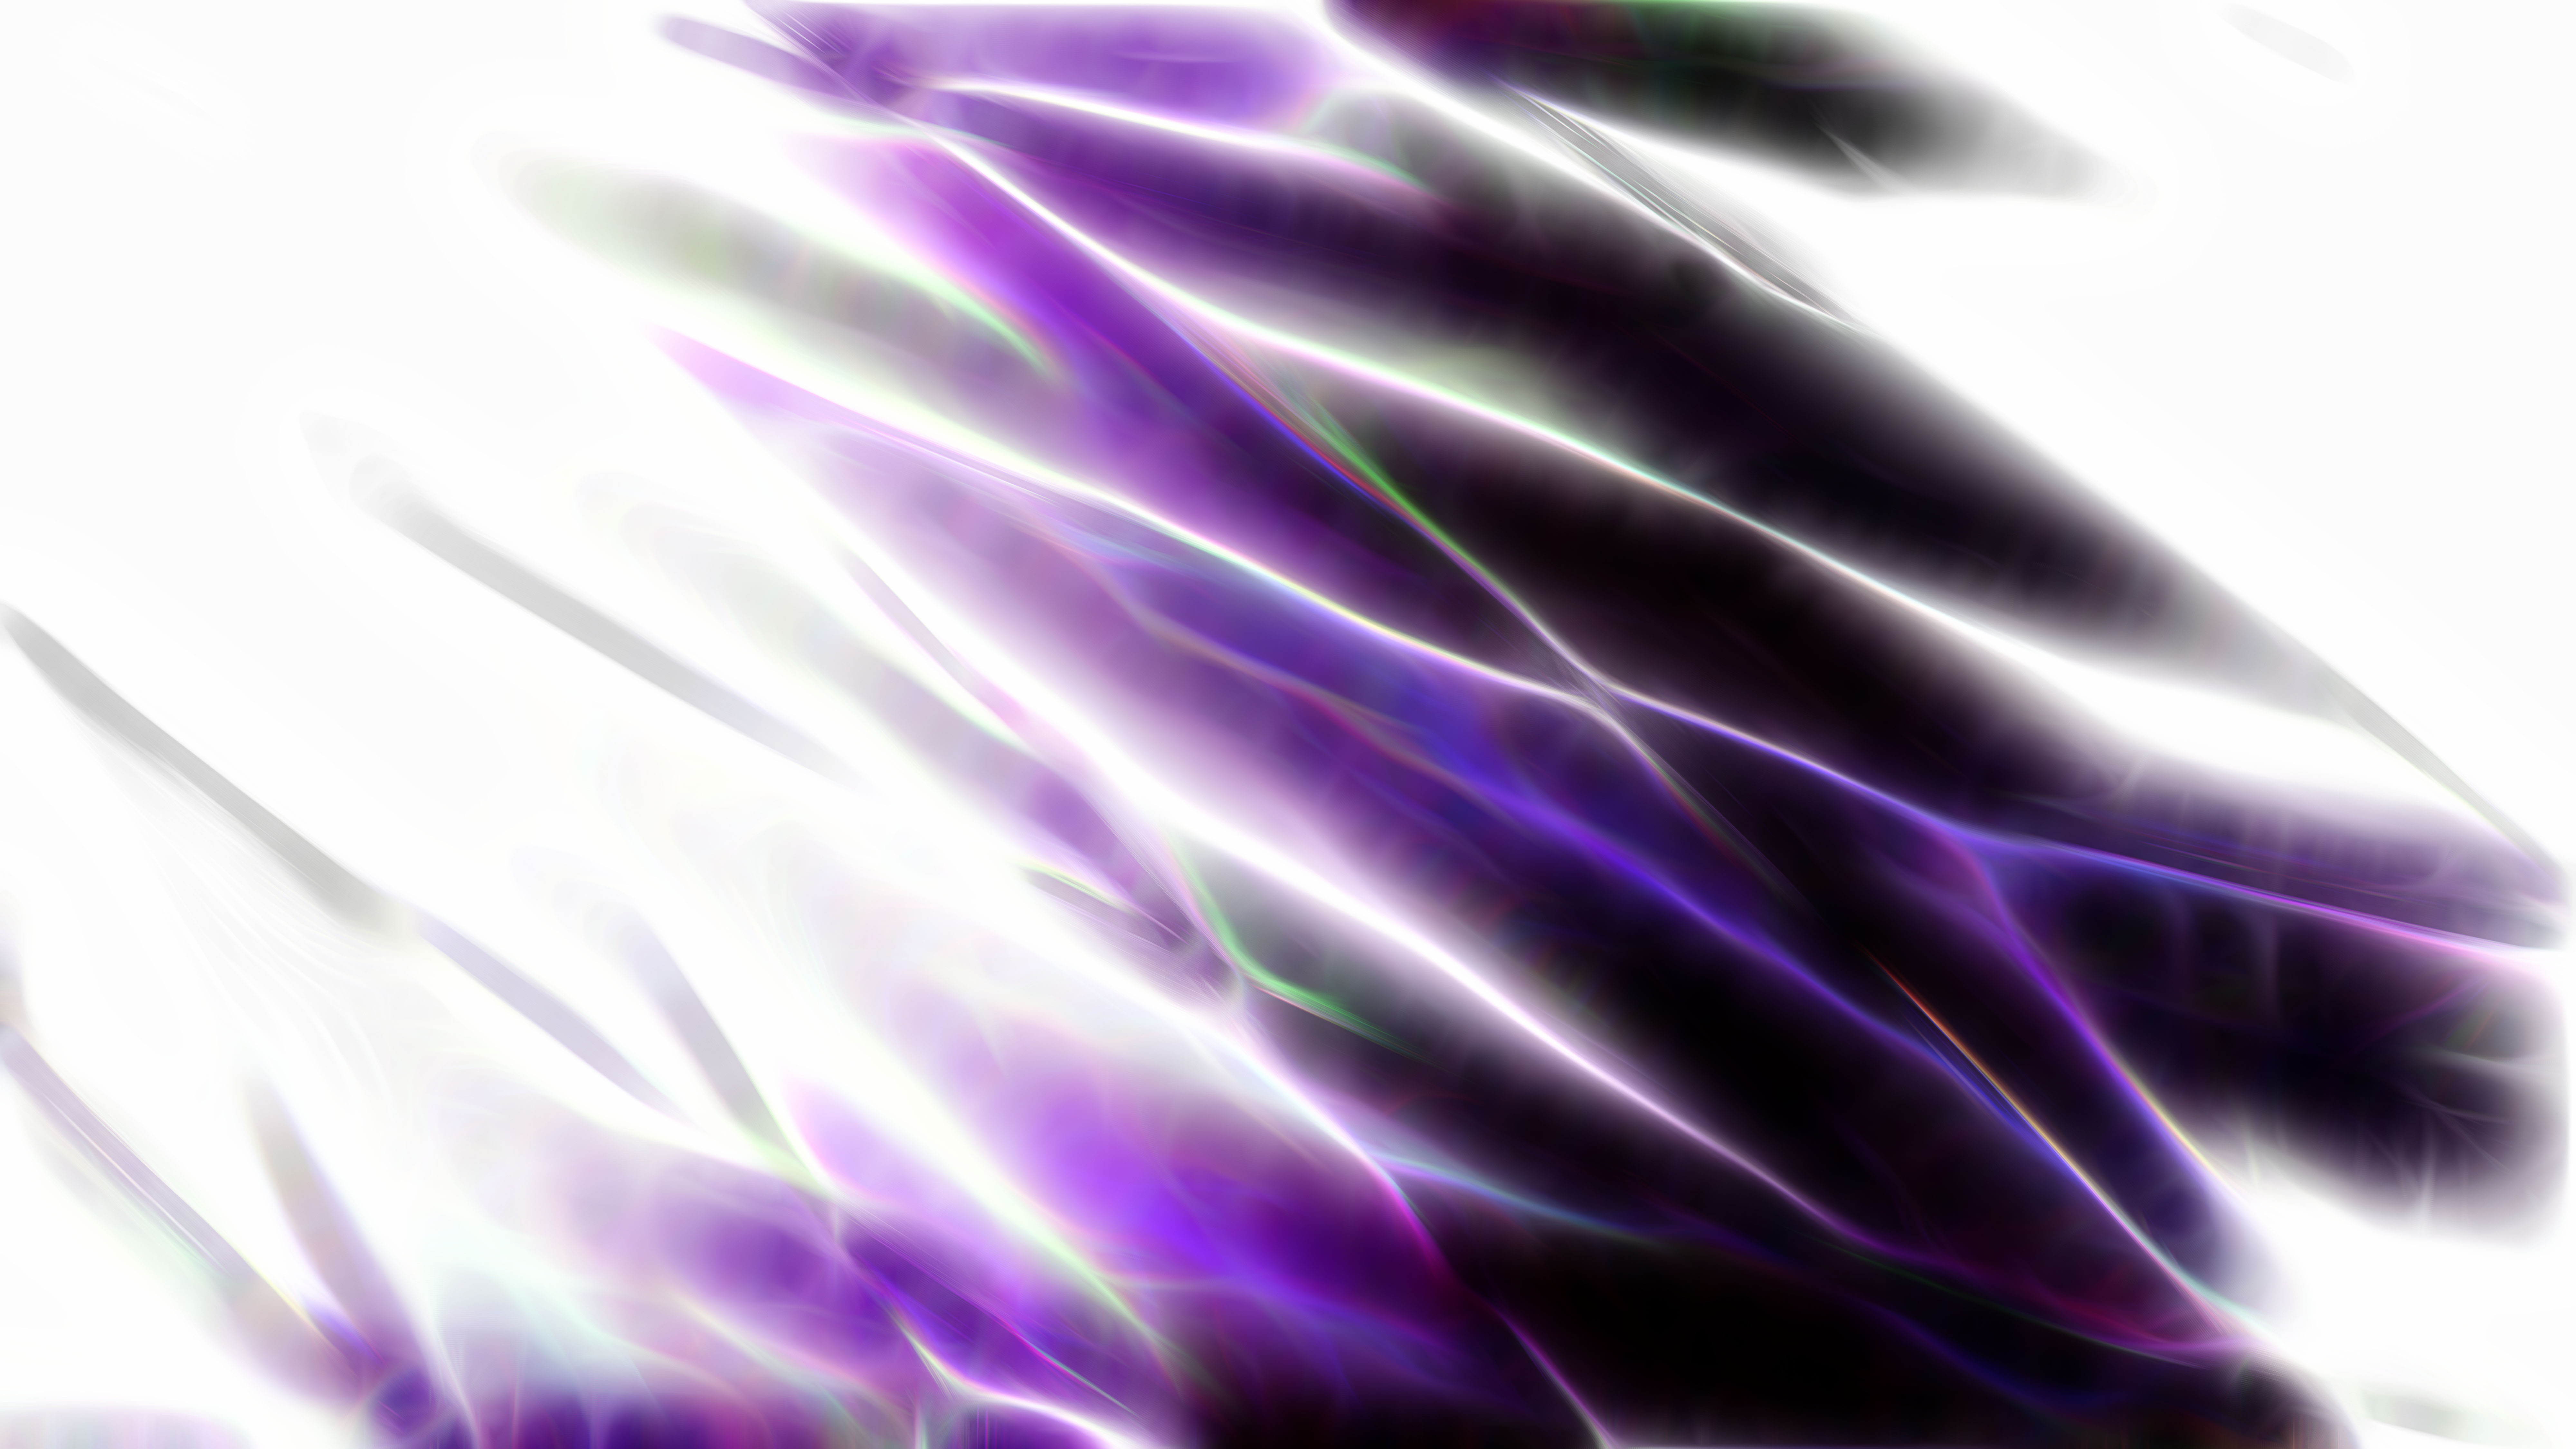 Abstract Wallpaper Purple and White by PhoenixRising23 on DeviantArt